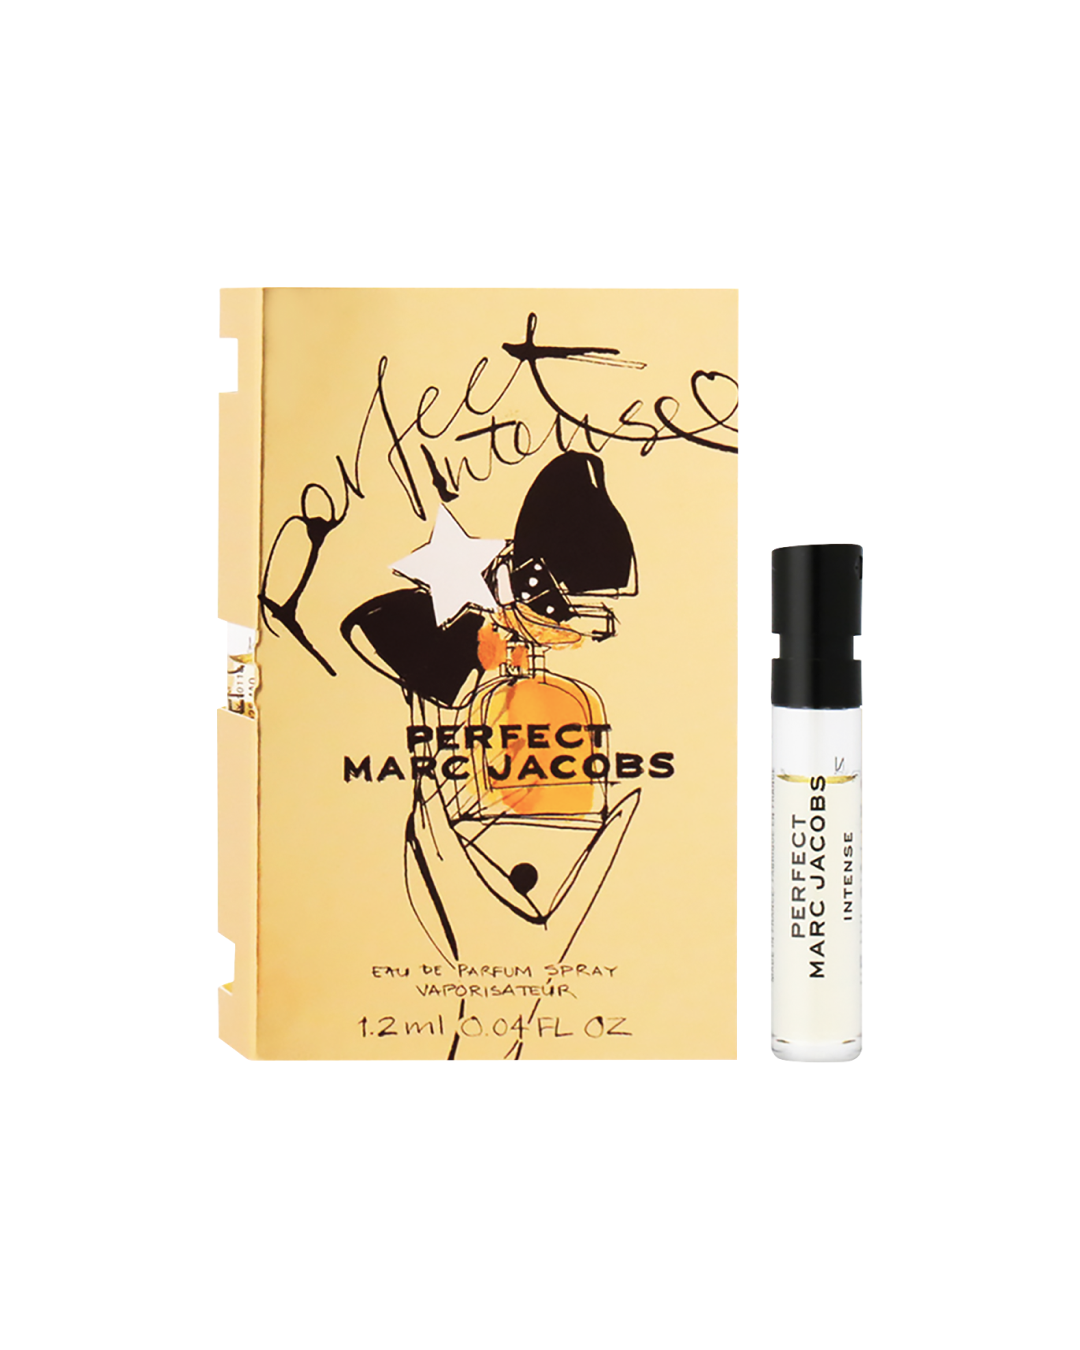 Marc Jacobs Perfect Intense EDP Travel Vial (1.2ml) - Best Buy World Philippines